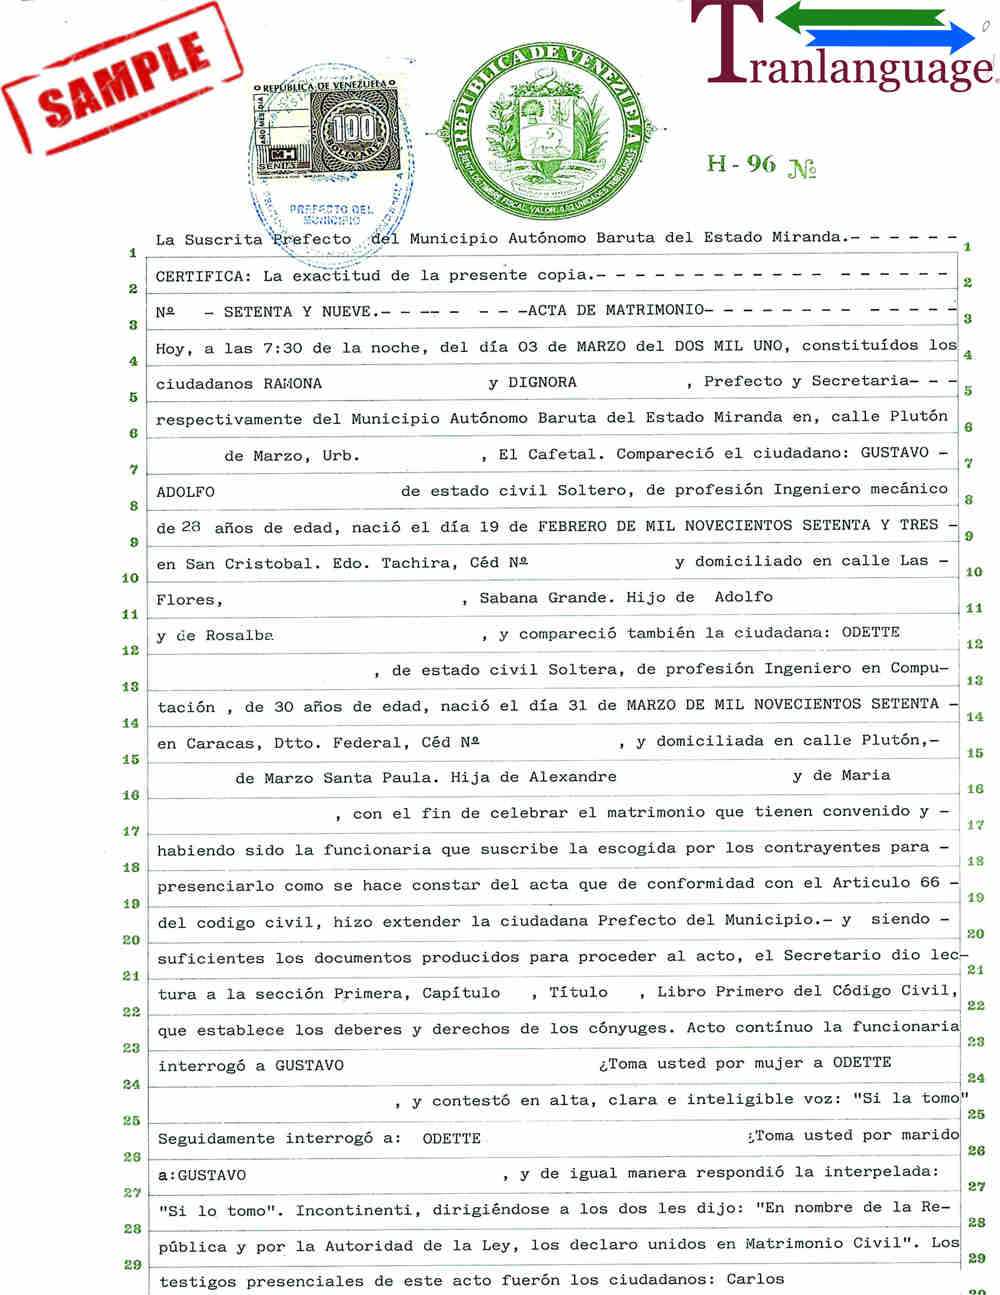 Marriage Certificate Venezuela With Marriage Certificate Translation From Spanish To English Template